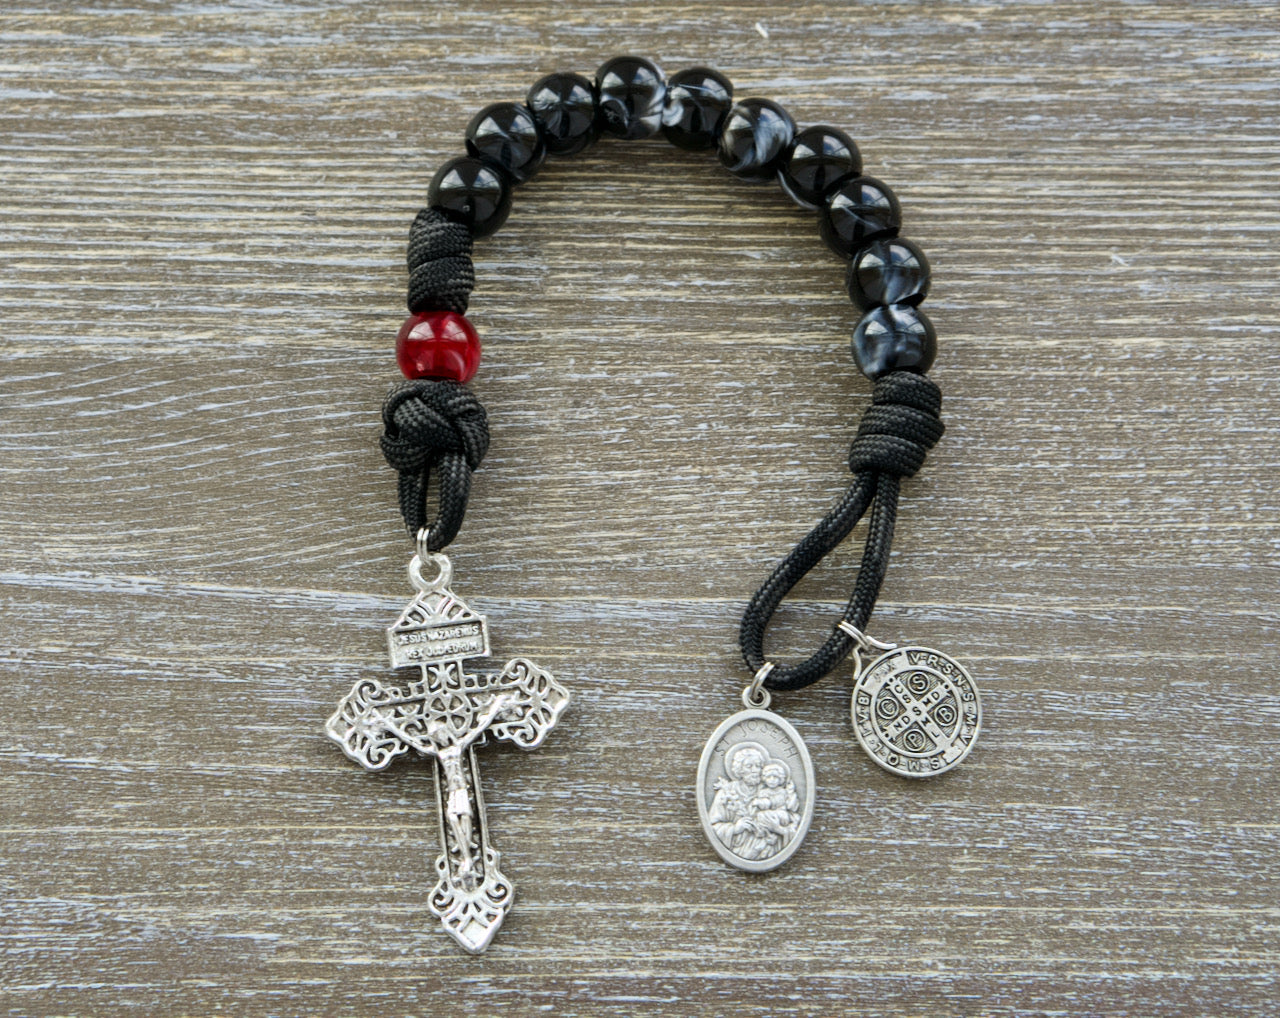 Discover the ultimate weapon against evil with our new "Terror of Demons" St. Joseph - Black and Red - 1 Decade Paracord Rosary! This durable paracord rosary is the perfect Catholic gift.